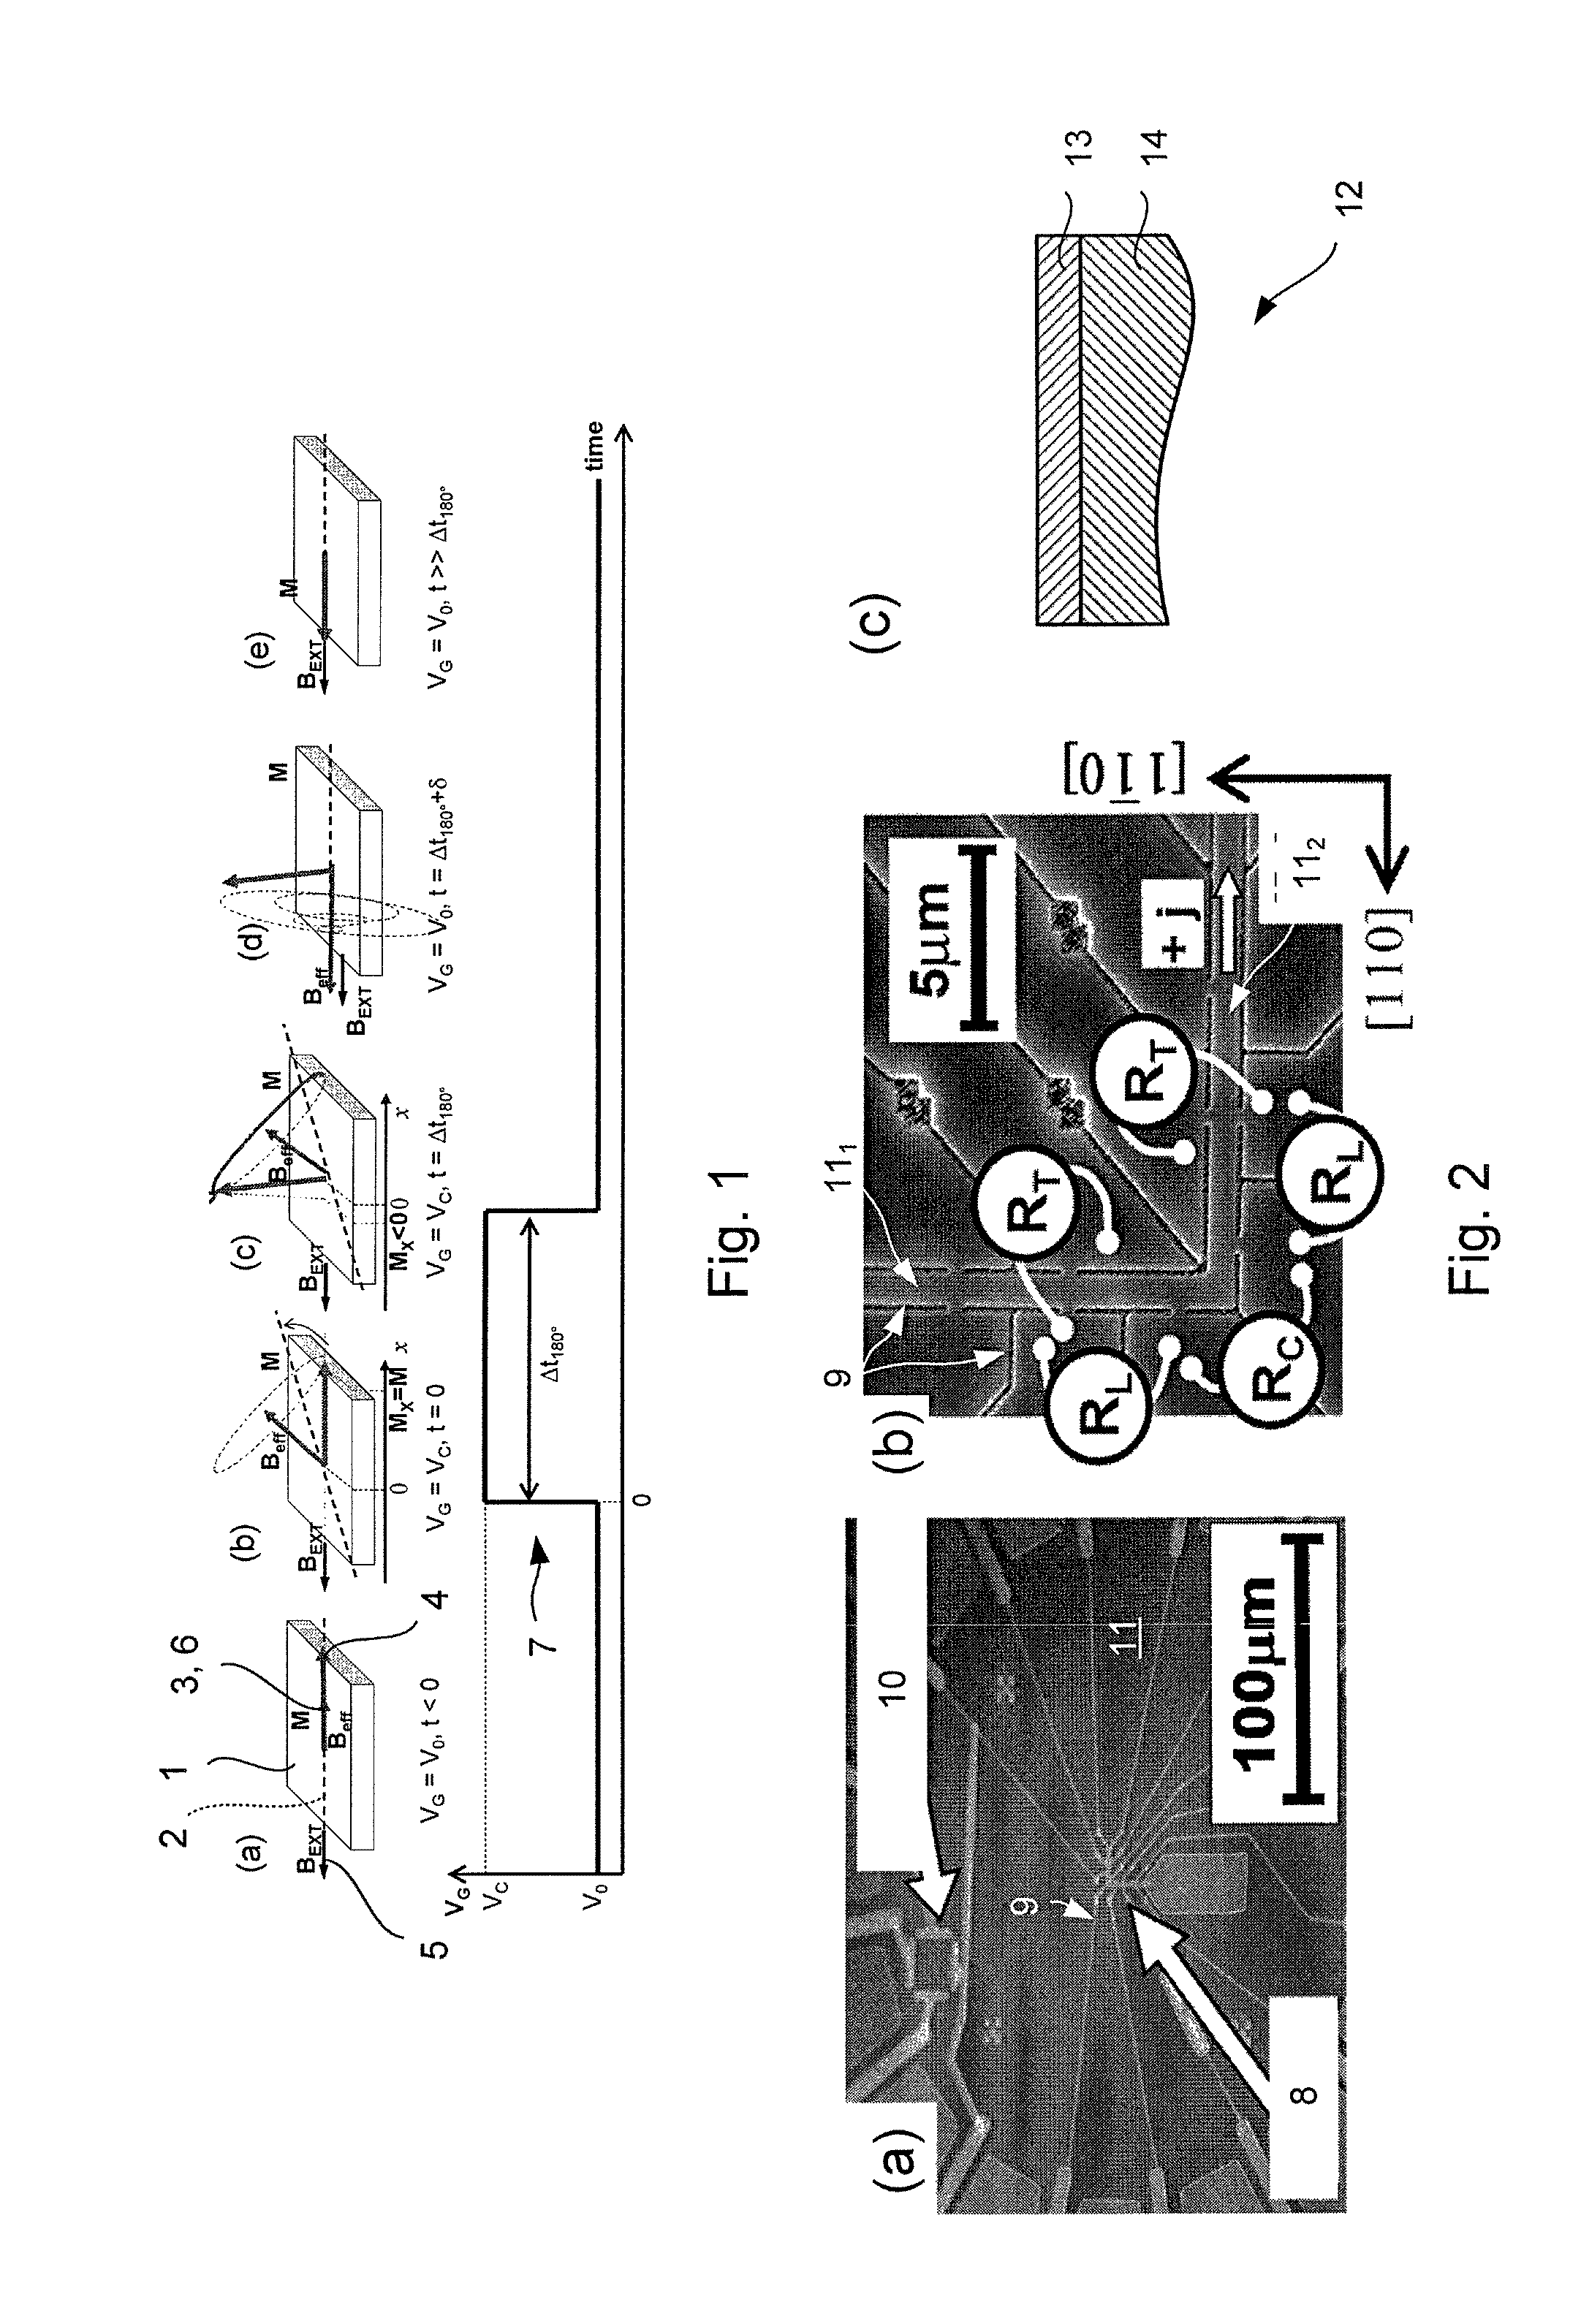 Method of controlling a magnetoresistive device using an electric field pulse